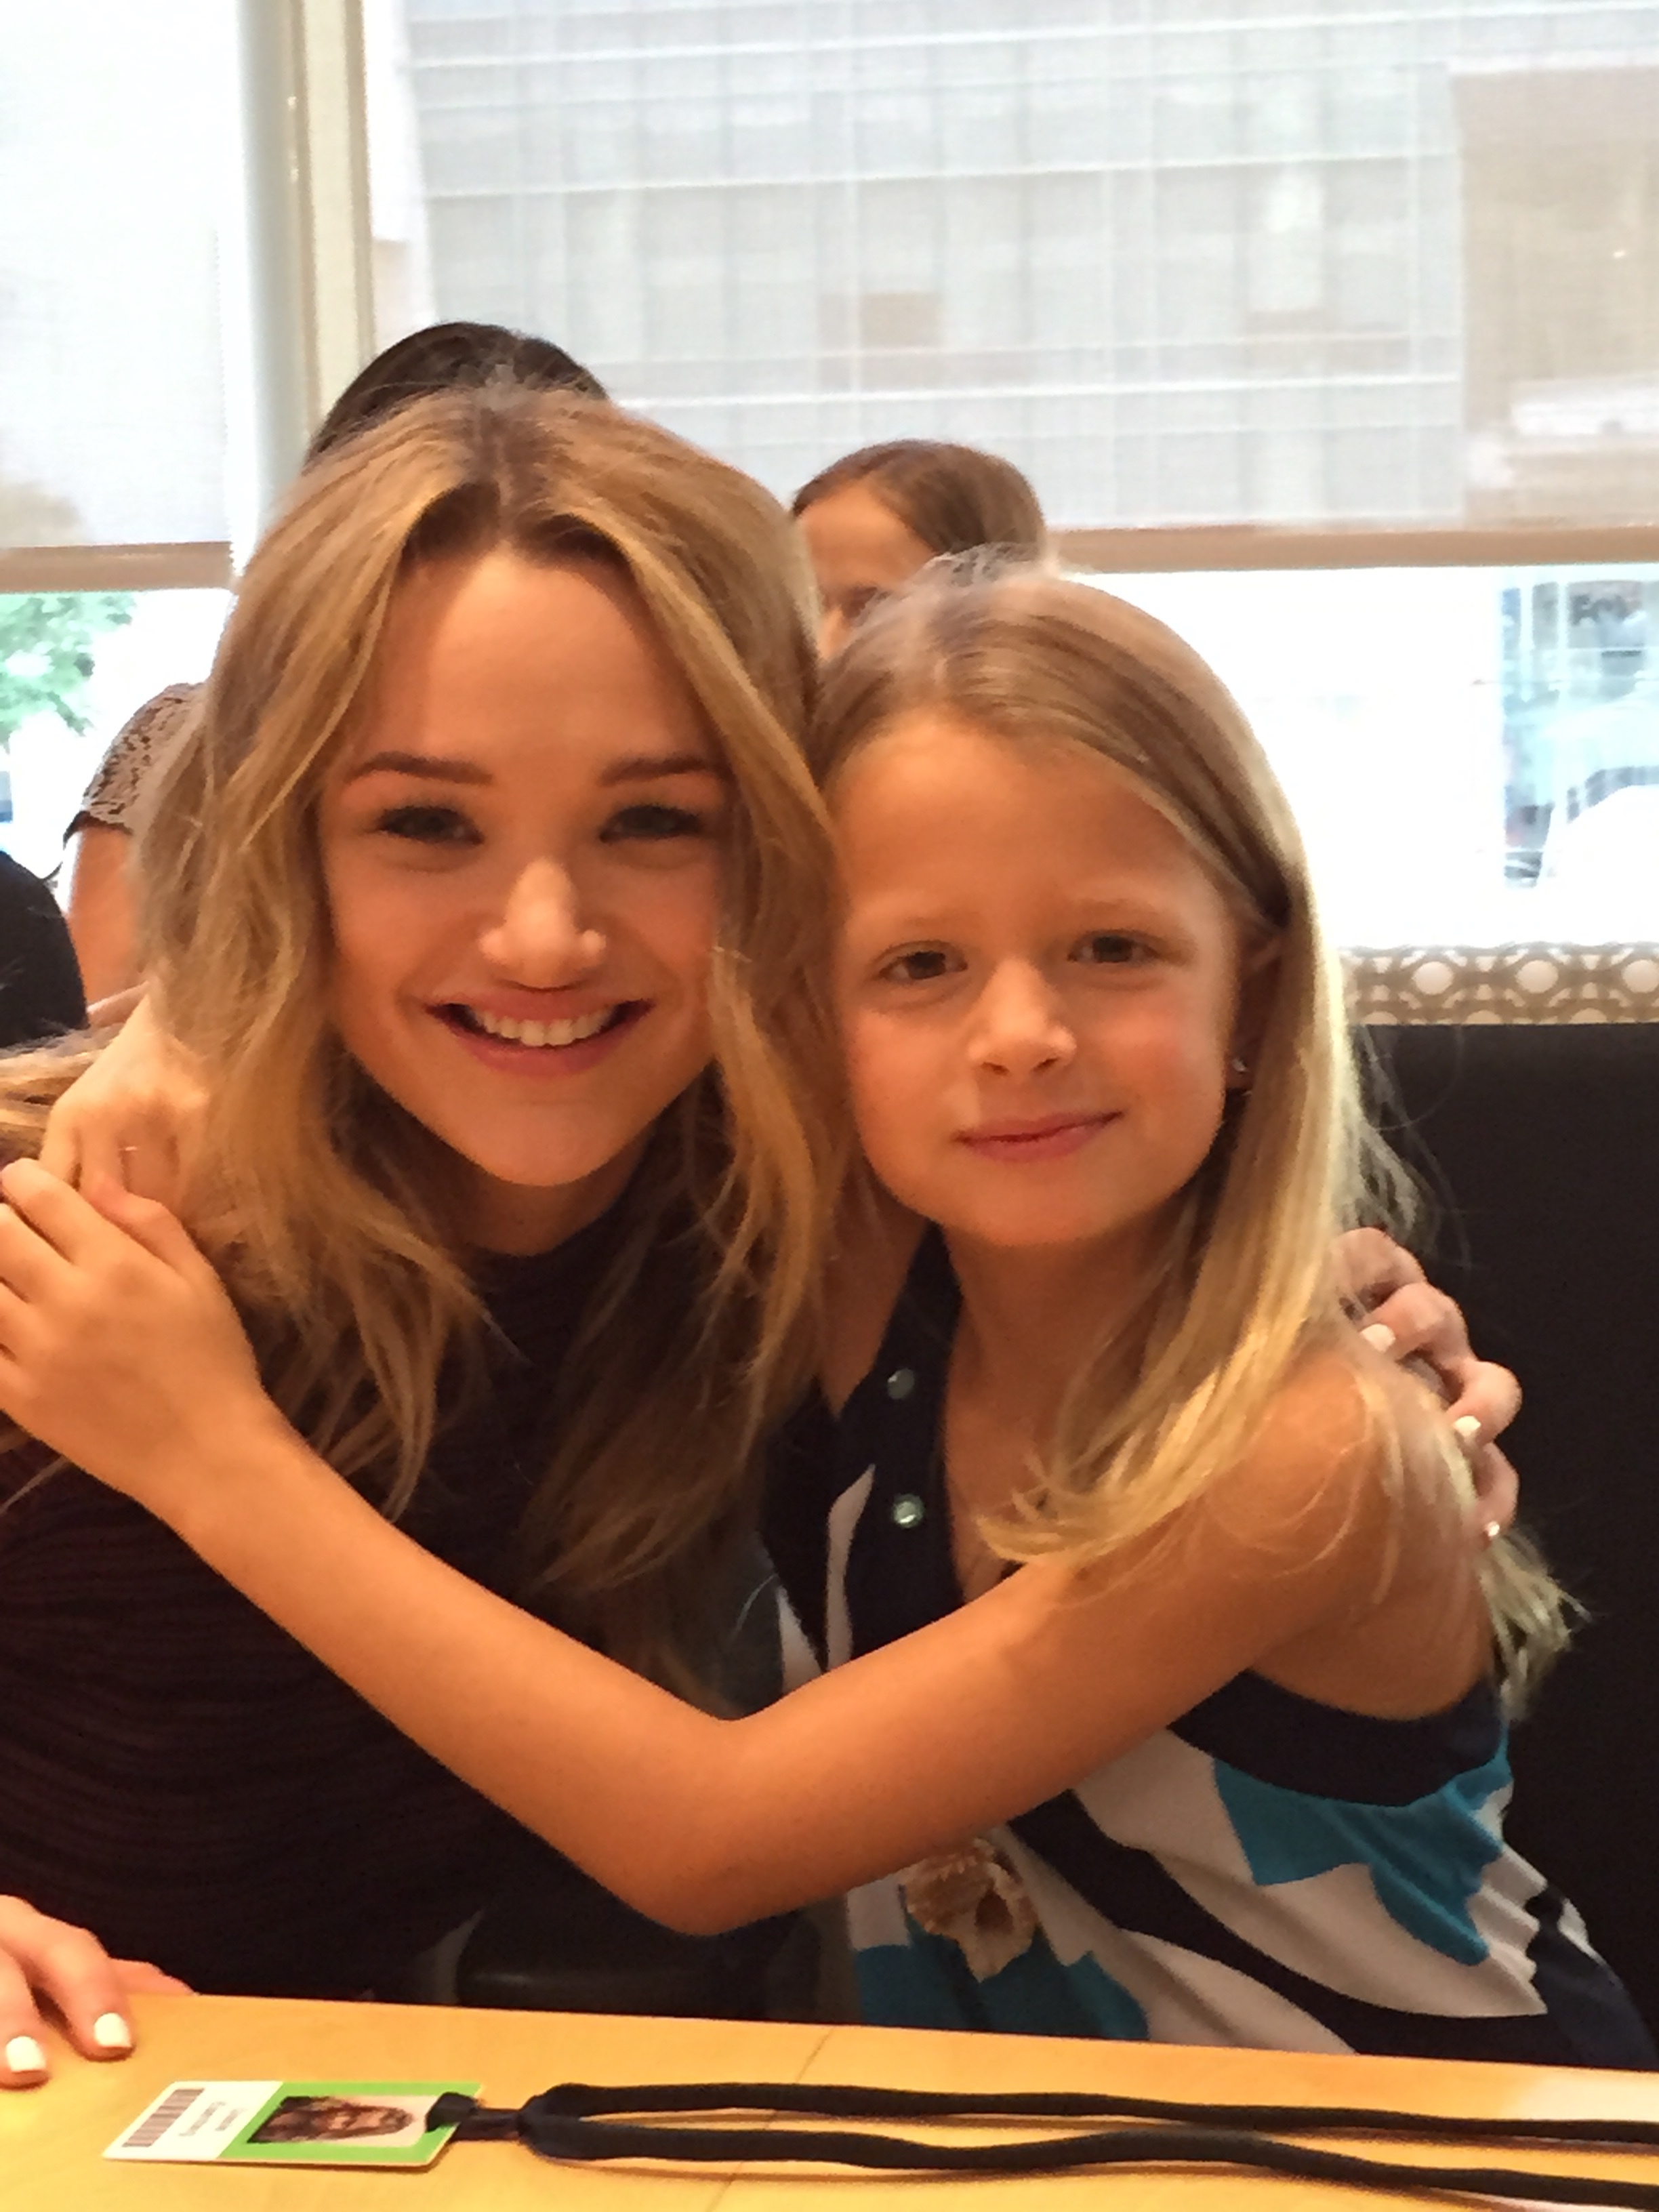 Hunter King and Giselle Eisenberg - Life In Pieces Event.